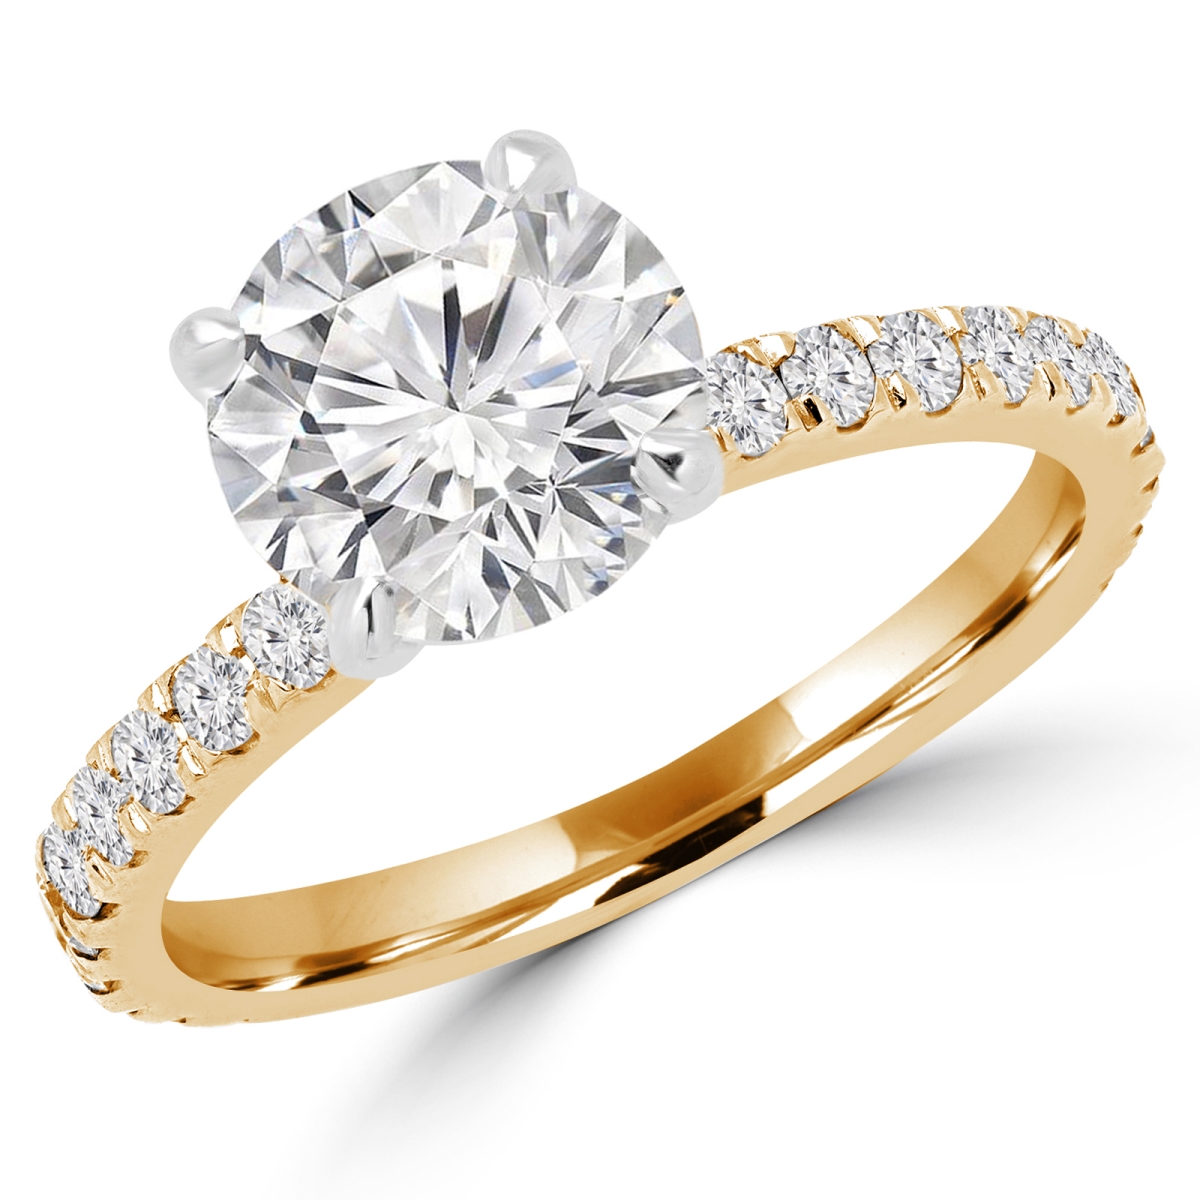 Picture of Majesty Diamonds MD160340-9 1 CTW Round Cut Diamond Multi Stone Engagement Ring in 14K Yellow Gold - Size 9